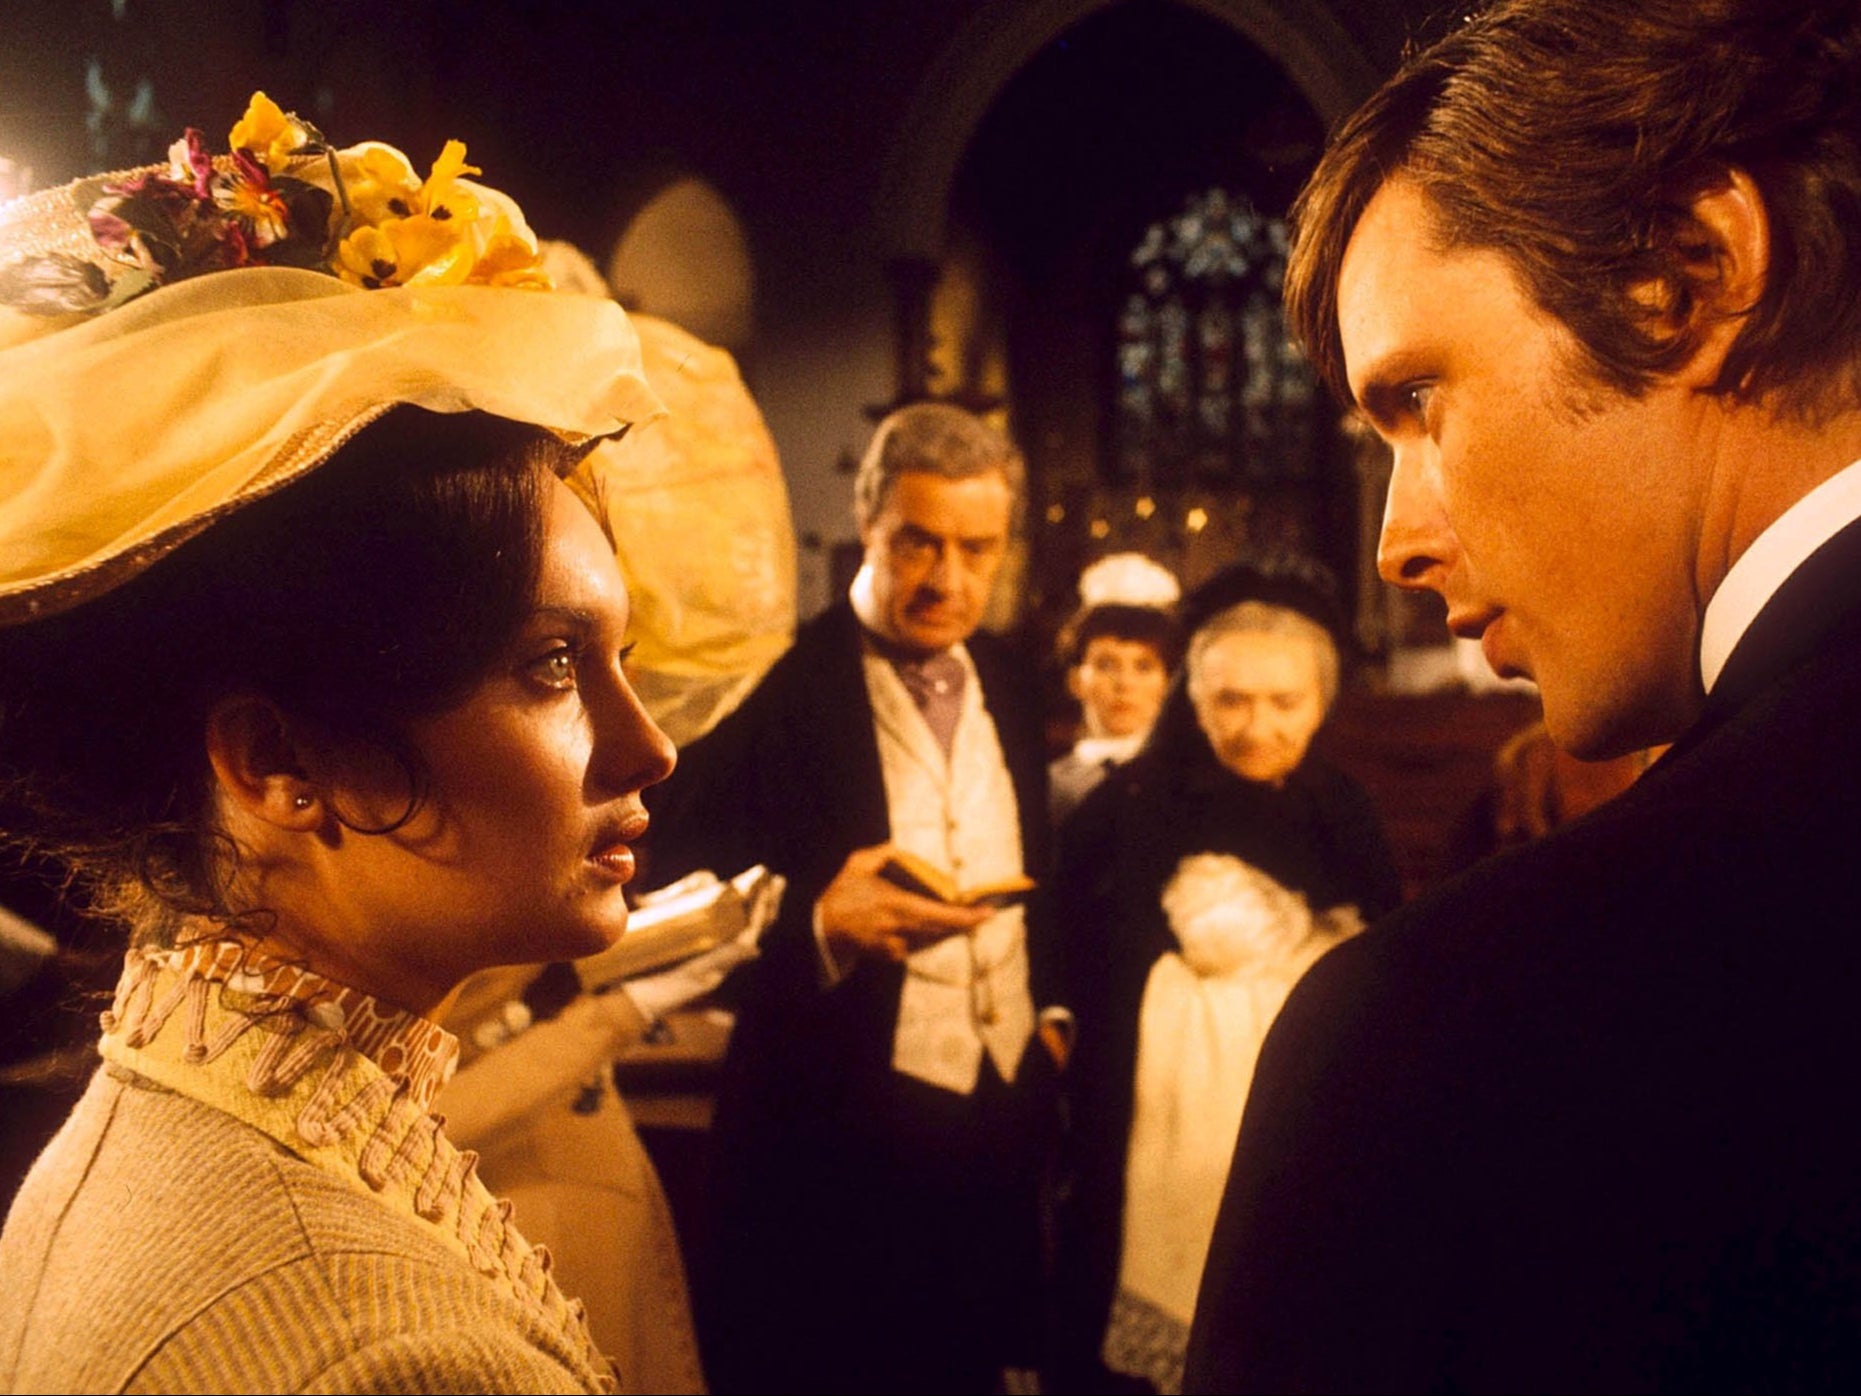 Nicola Pagett and Ian Ogilvy in Upstairs, Downstairs